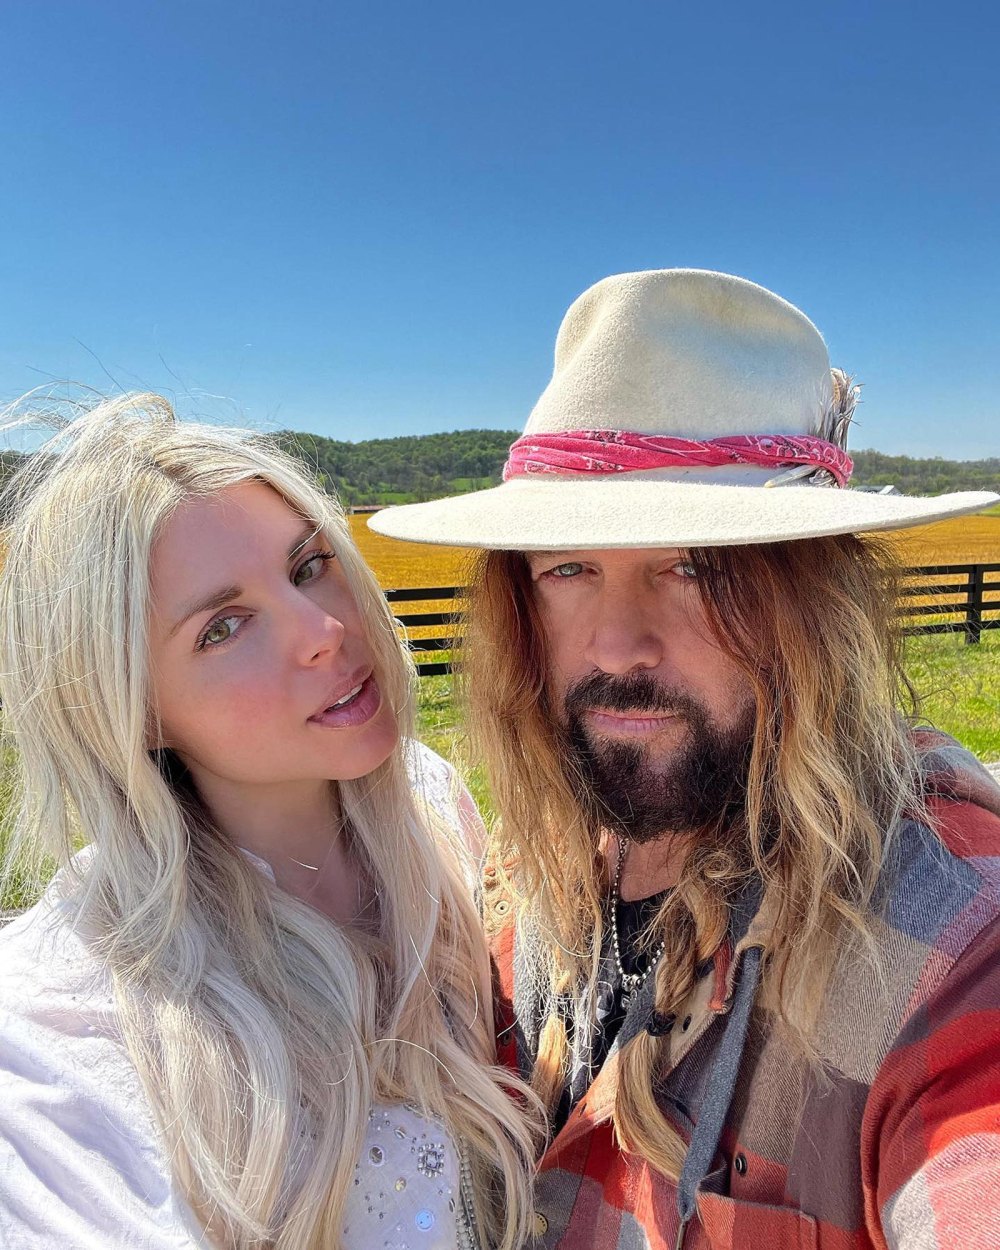 Billy Ray Cyrus Accuses Estranged Wife Firerose of Verbal Emotional and Physical Abuse